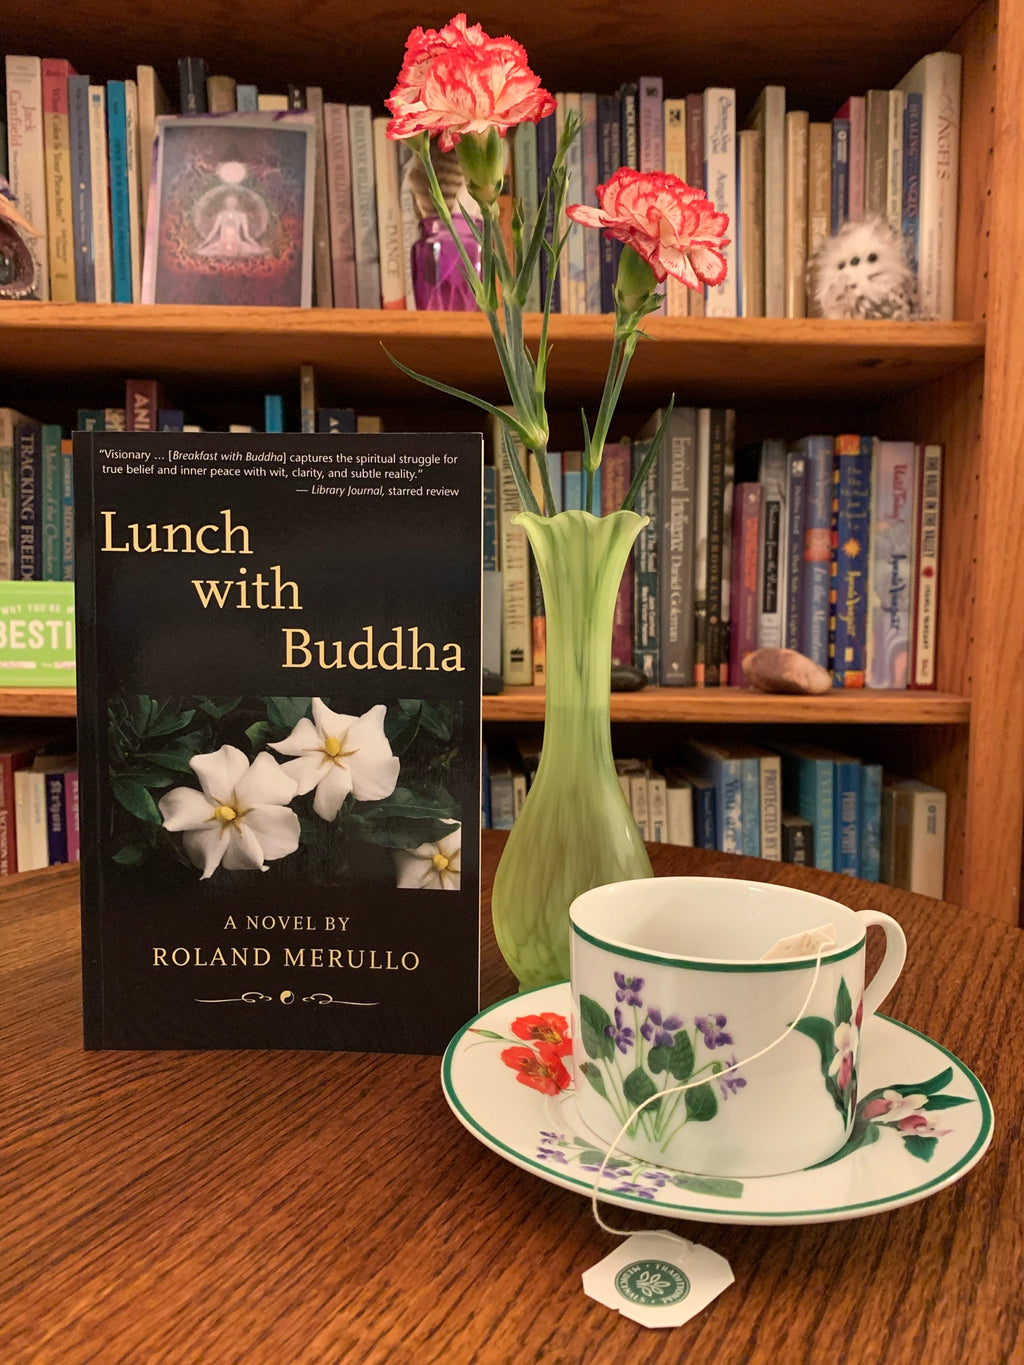 Lunch With Buddha. Let me just tell you that this book and the other two in this series are some of the most enjoyable I have read.  I have even re-read them and I rarely do that. This book is fiction, but laced with wonderful spiritual insights and laugh-out-loud moments! It is fun to read and deeply touching to the heart, soul and spirit. The protagonist gets stuck taking a cross-country drive with a spiritual guru and there the fun continues in this 2nd book in the series. Cost is $15.85. 